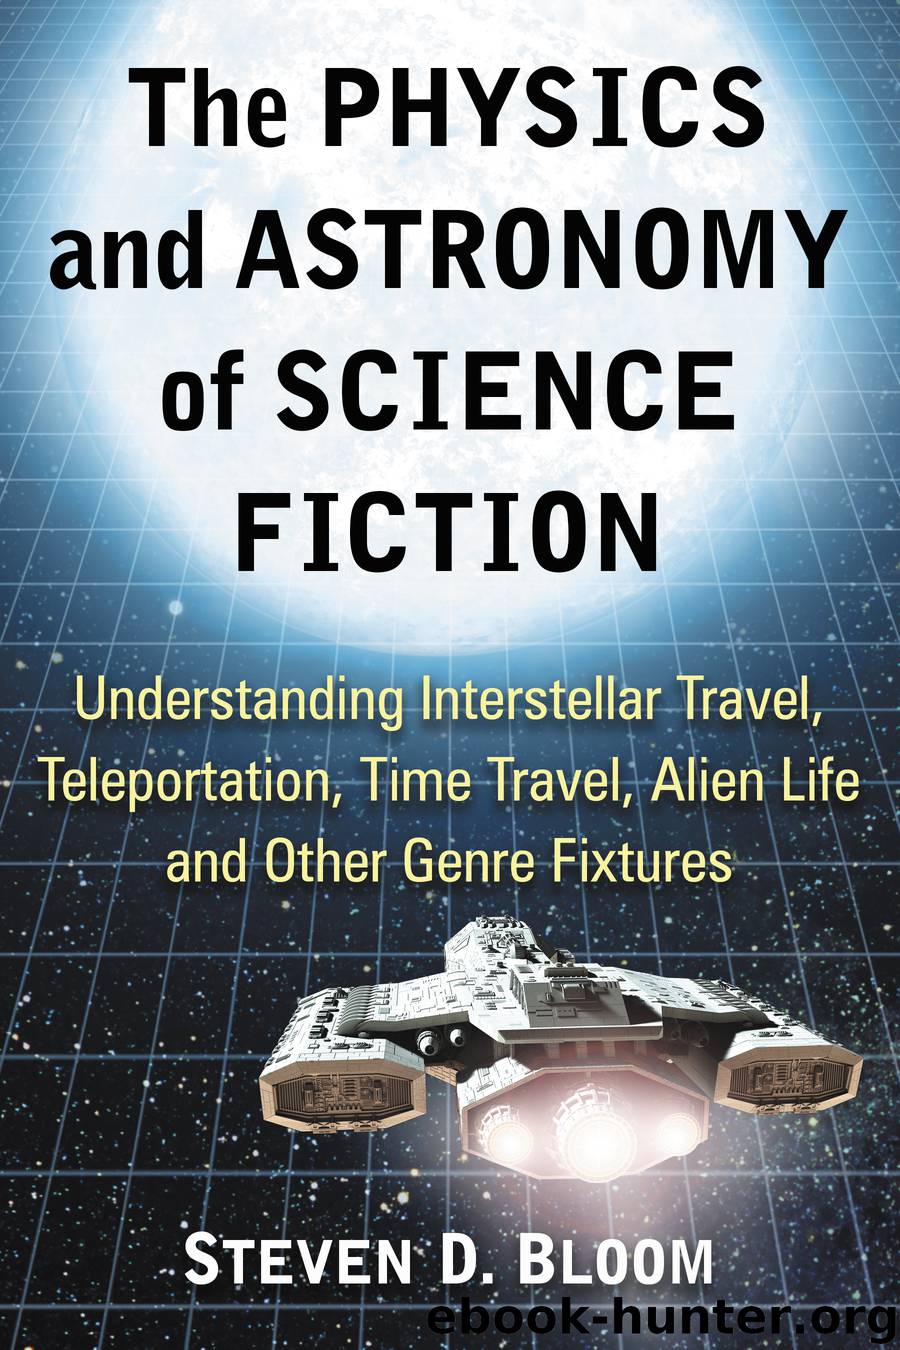 The Physics and Astronomy of Science Fiction by Steven D. Bloom